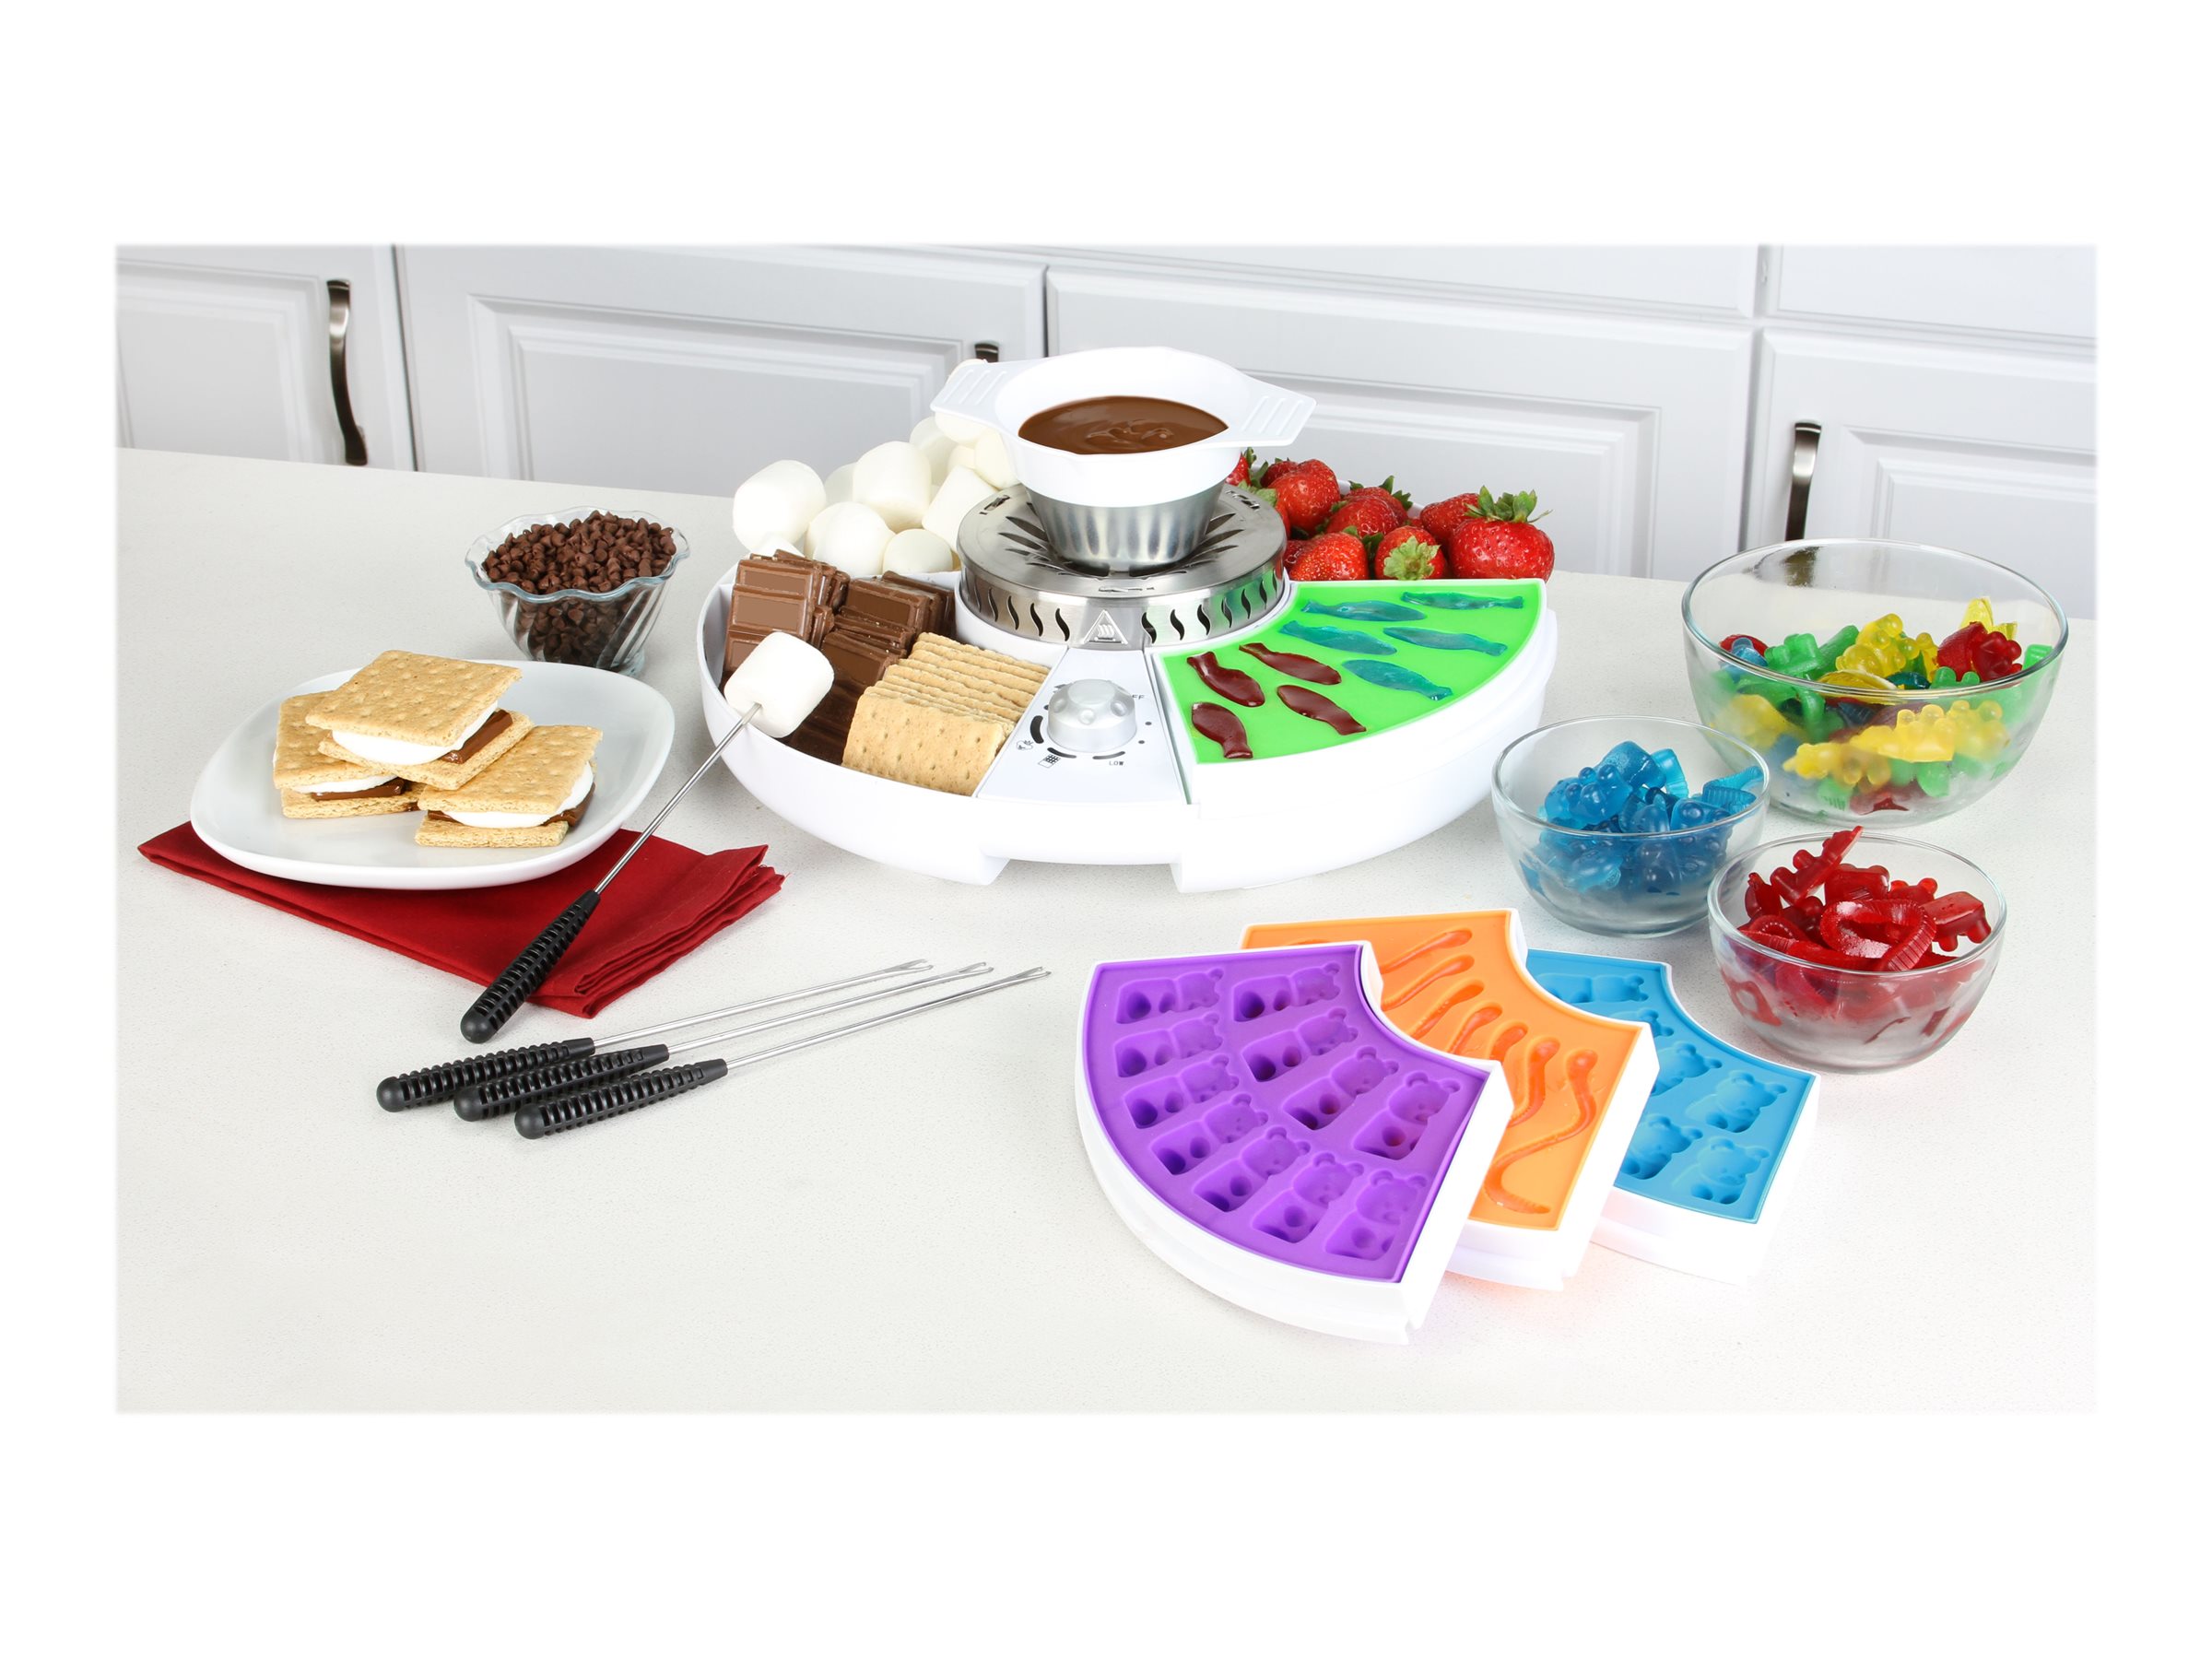 KOVOT 3-in-1 Treat Maker S'mores/Fondue & Gummies Station With